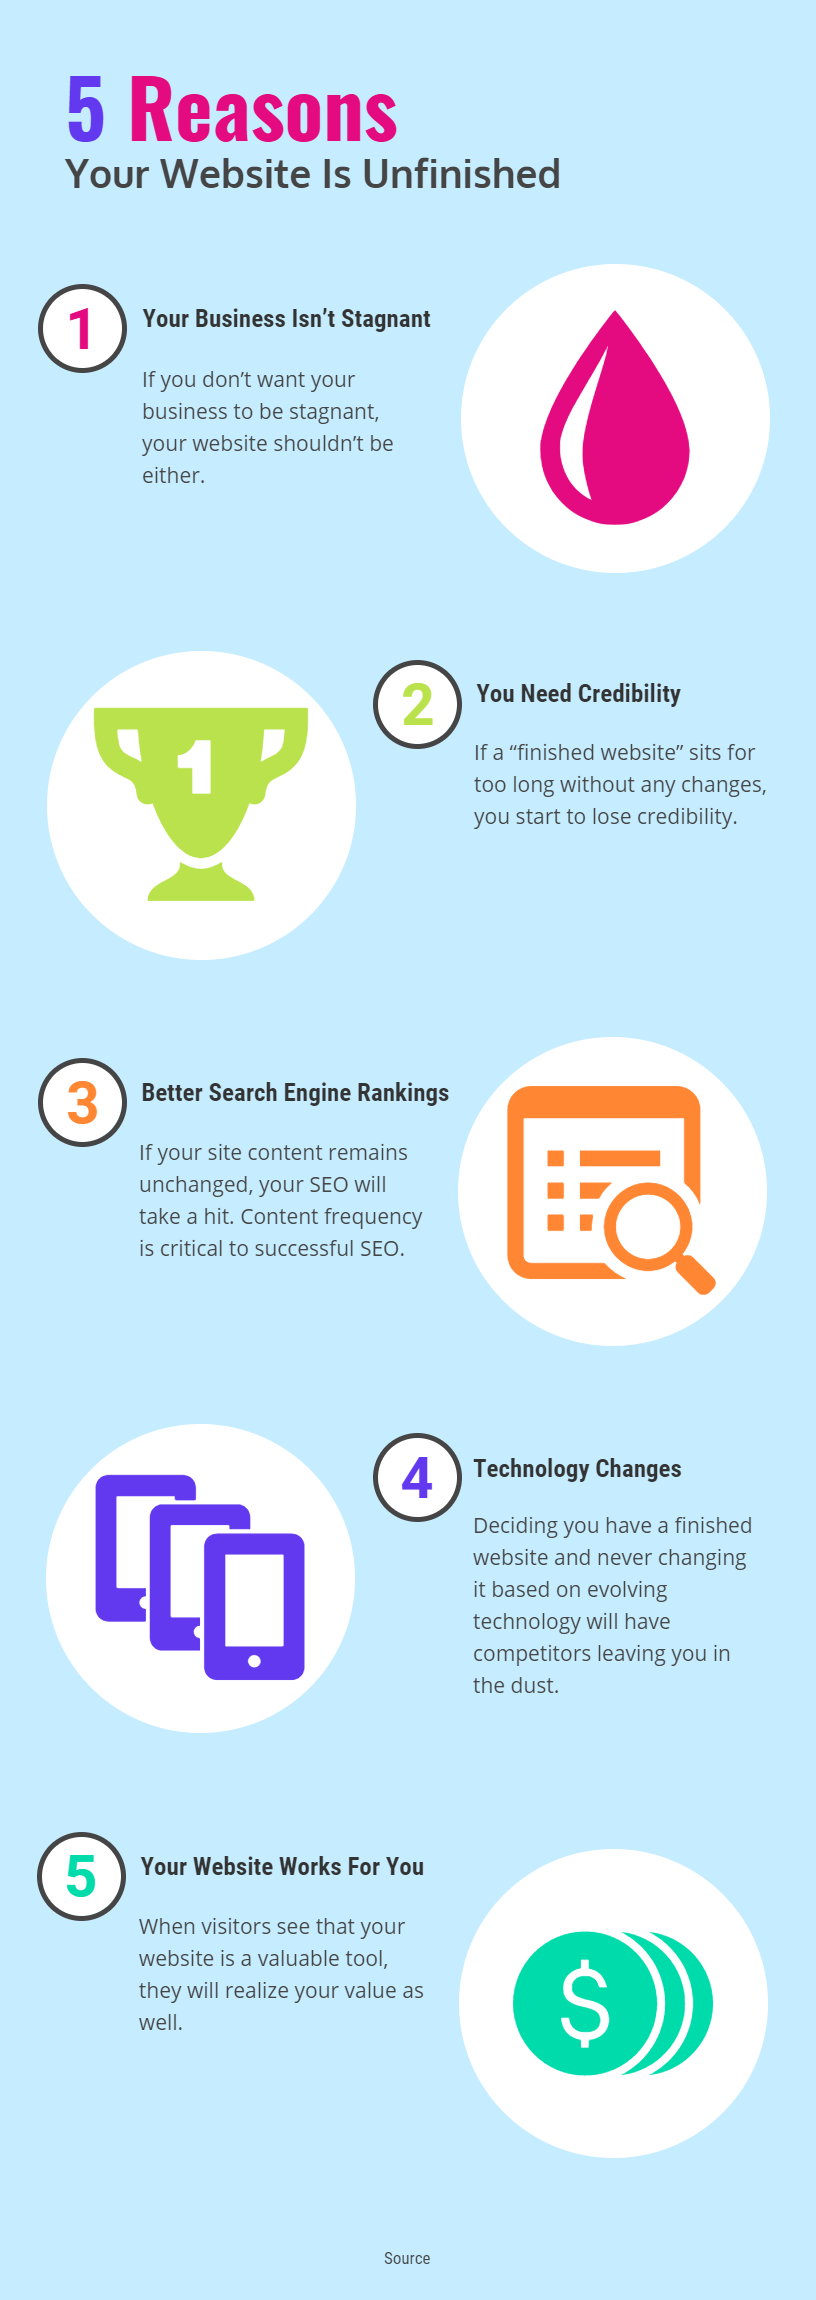 5 reasons your website is unfinished infographic